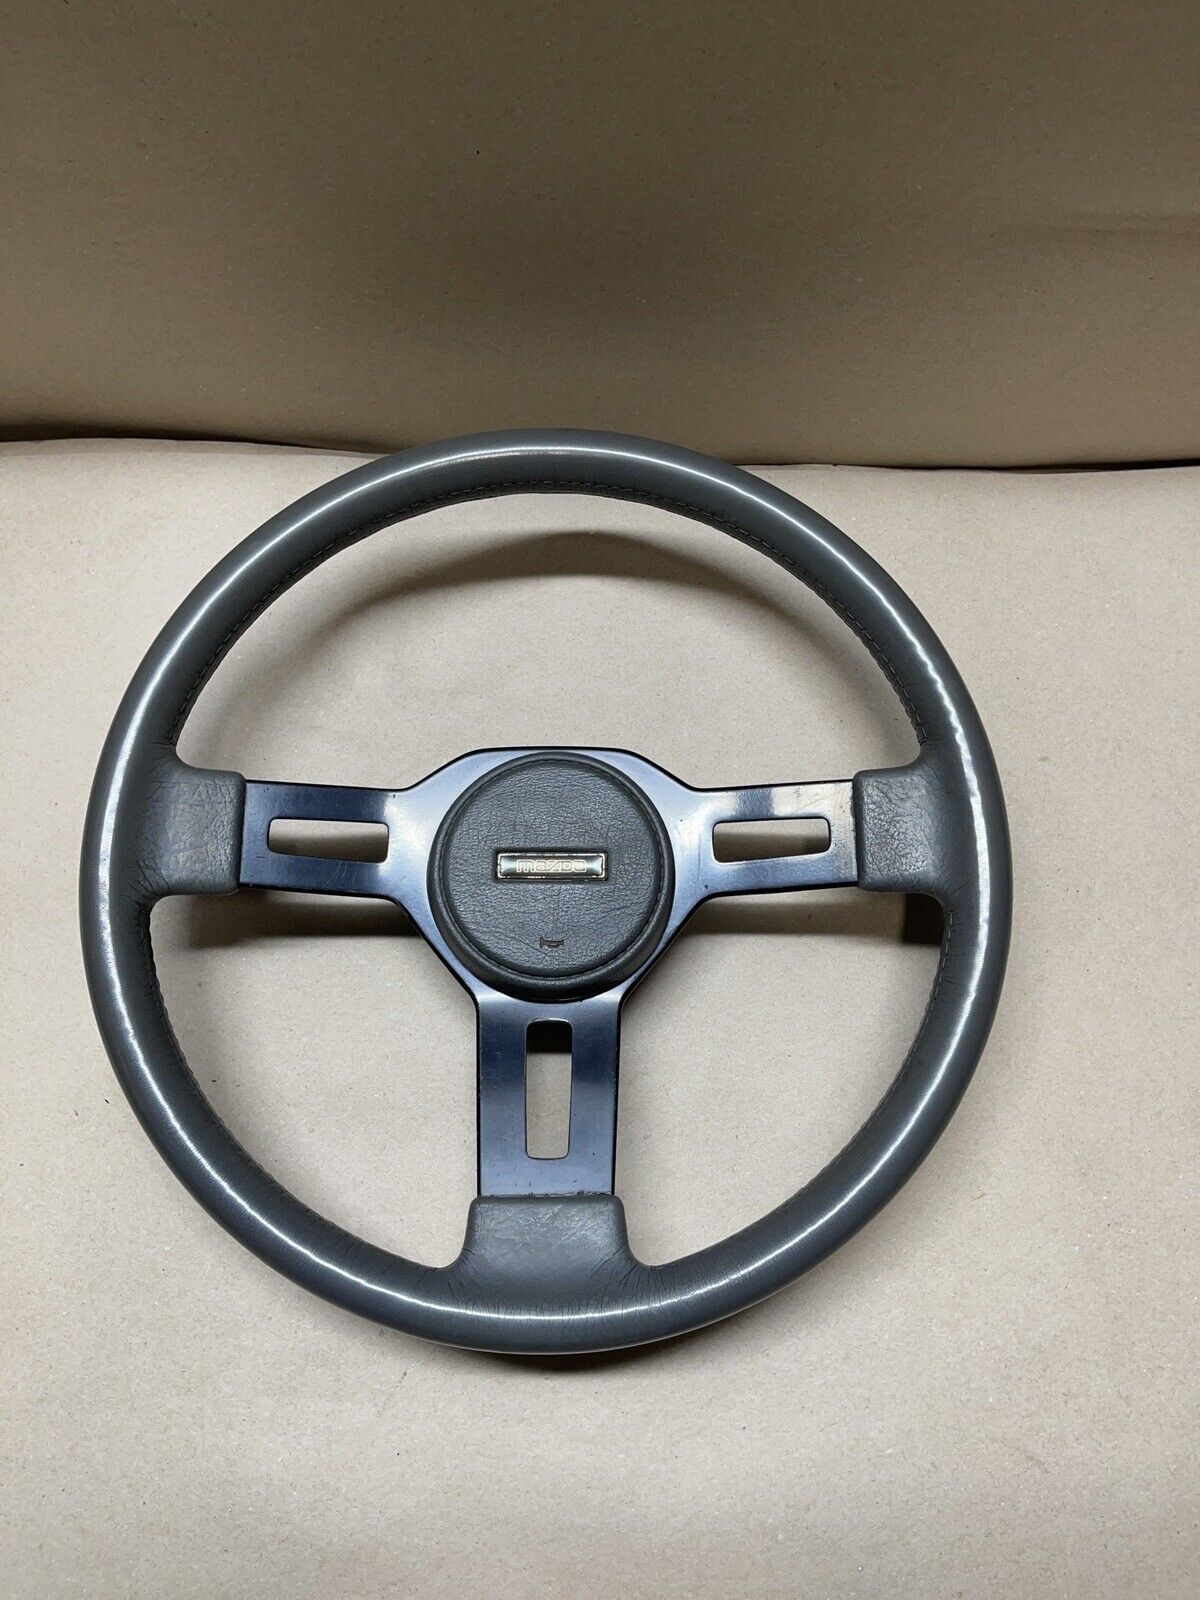 1986-1993 Mazda RX7 / B2200 2600 Pickup Steering Wheel Leather Wrapped OEM Gray